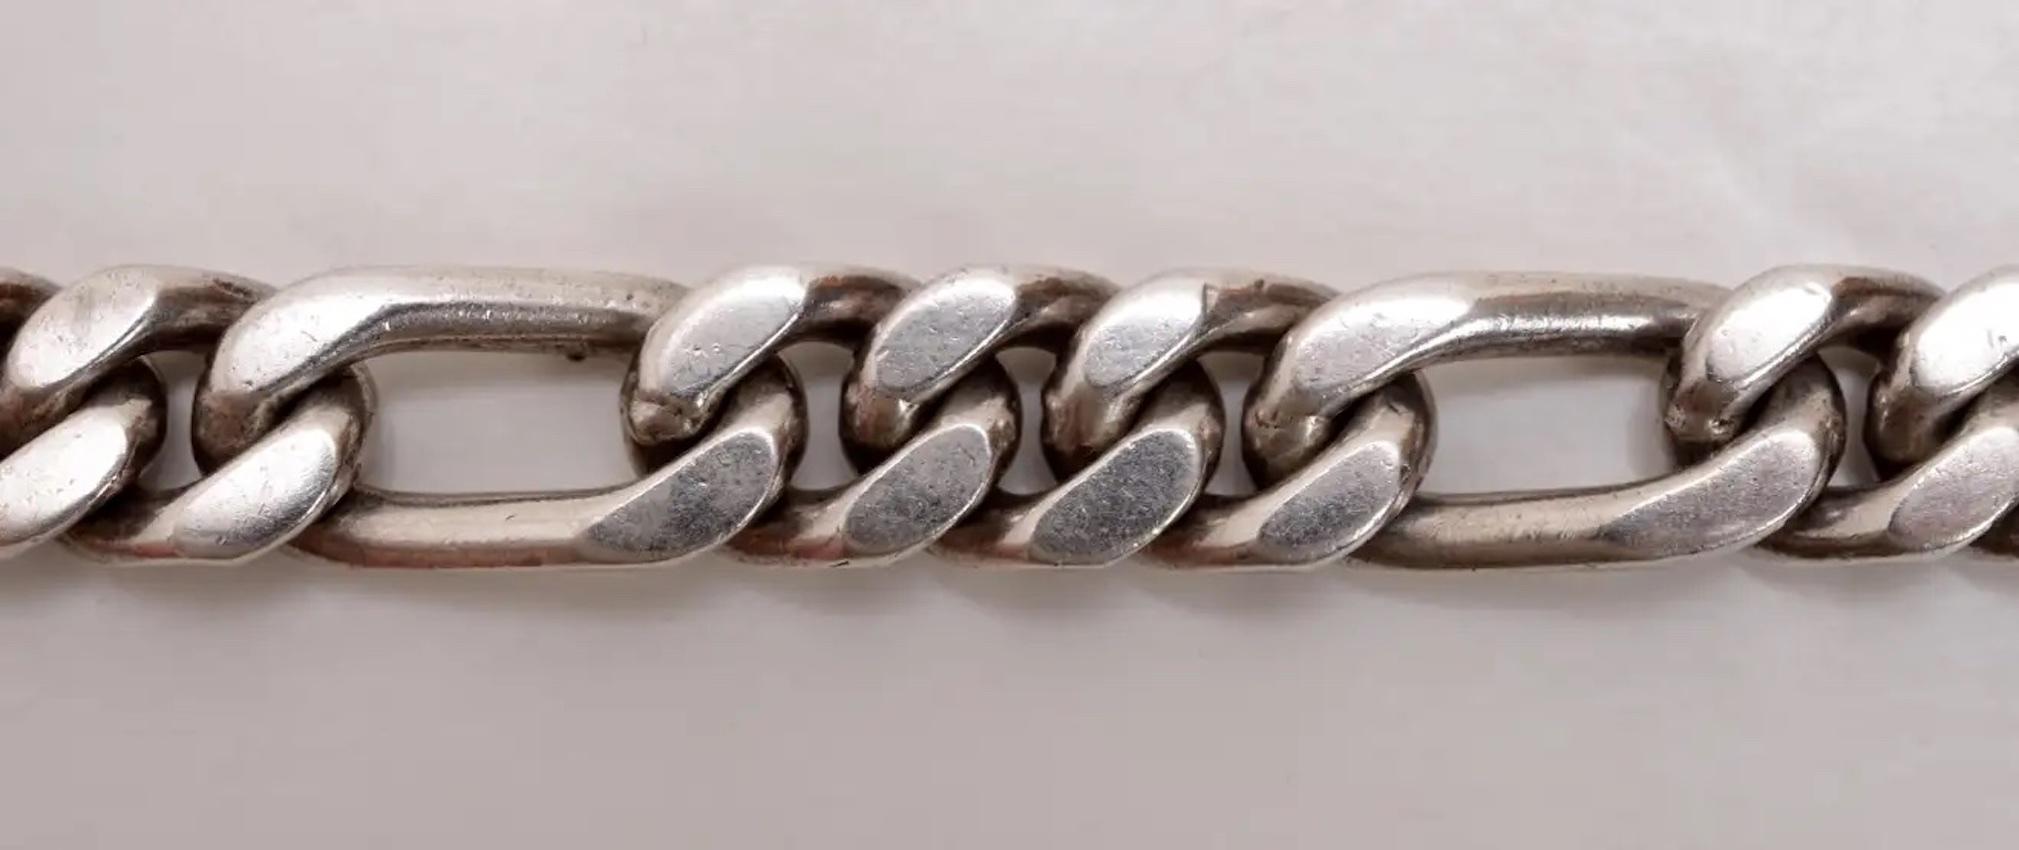 Vintage Mexican Sterling Silver (.925) Heavy, Large Figaro Link Bracelet From Taxco, Marked Mexico .925, ID-17. With double locking clasp.
Trent Antiques has been a respected name in antiques for over 30 years with a large collection of period